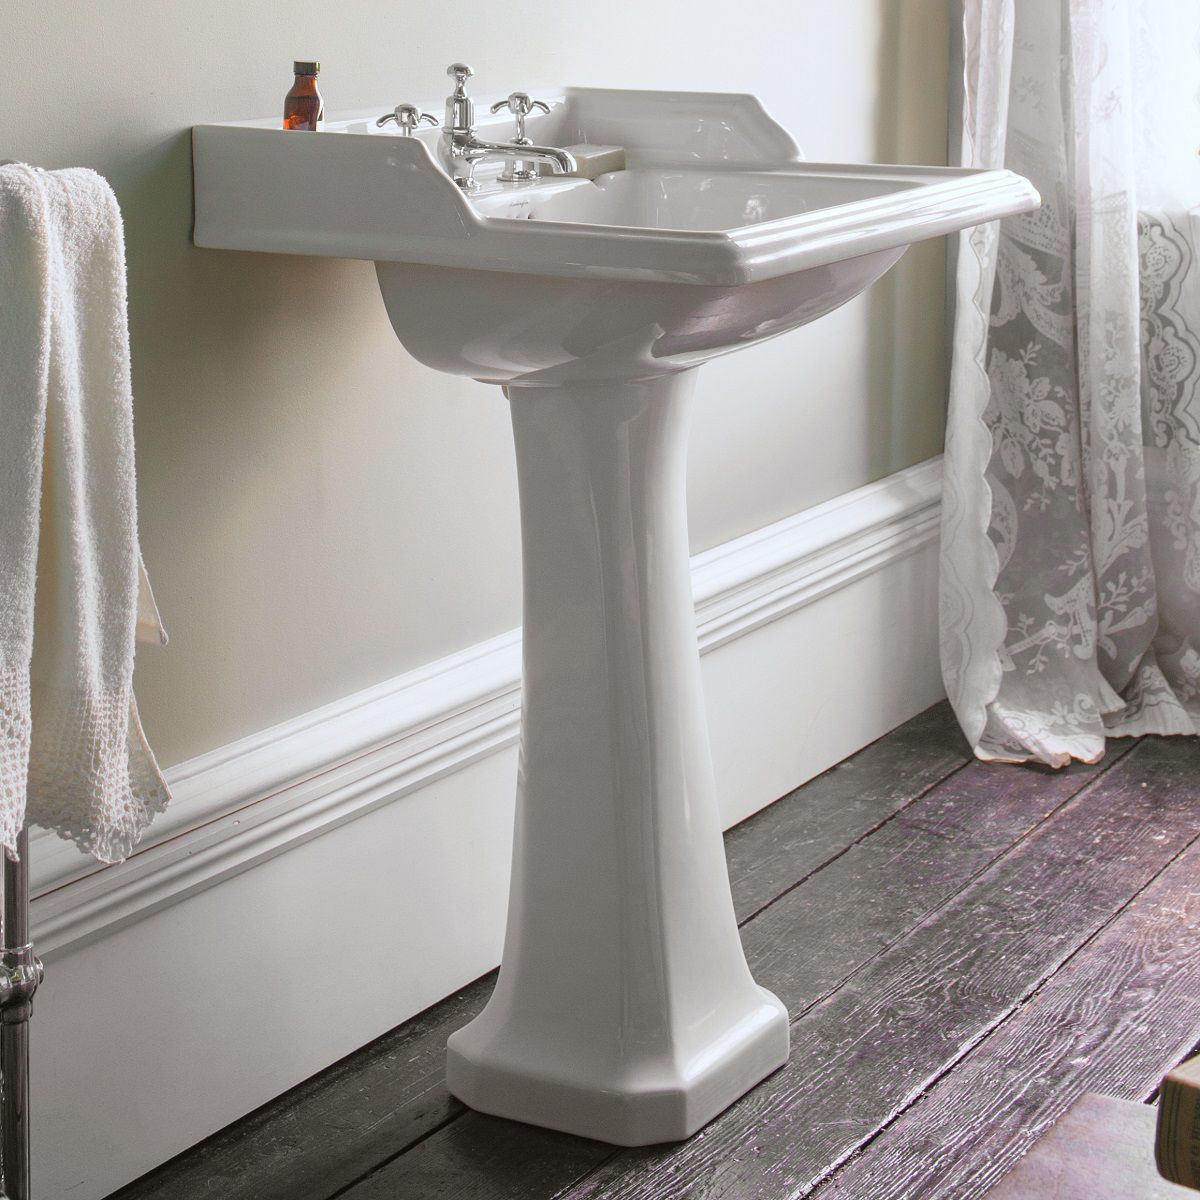 image example of a traditional style basin